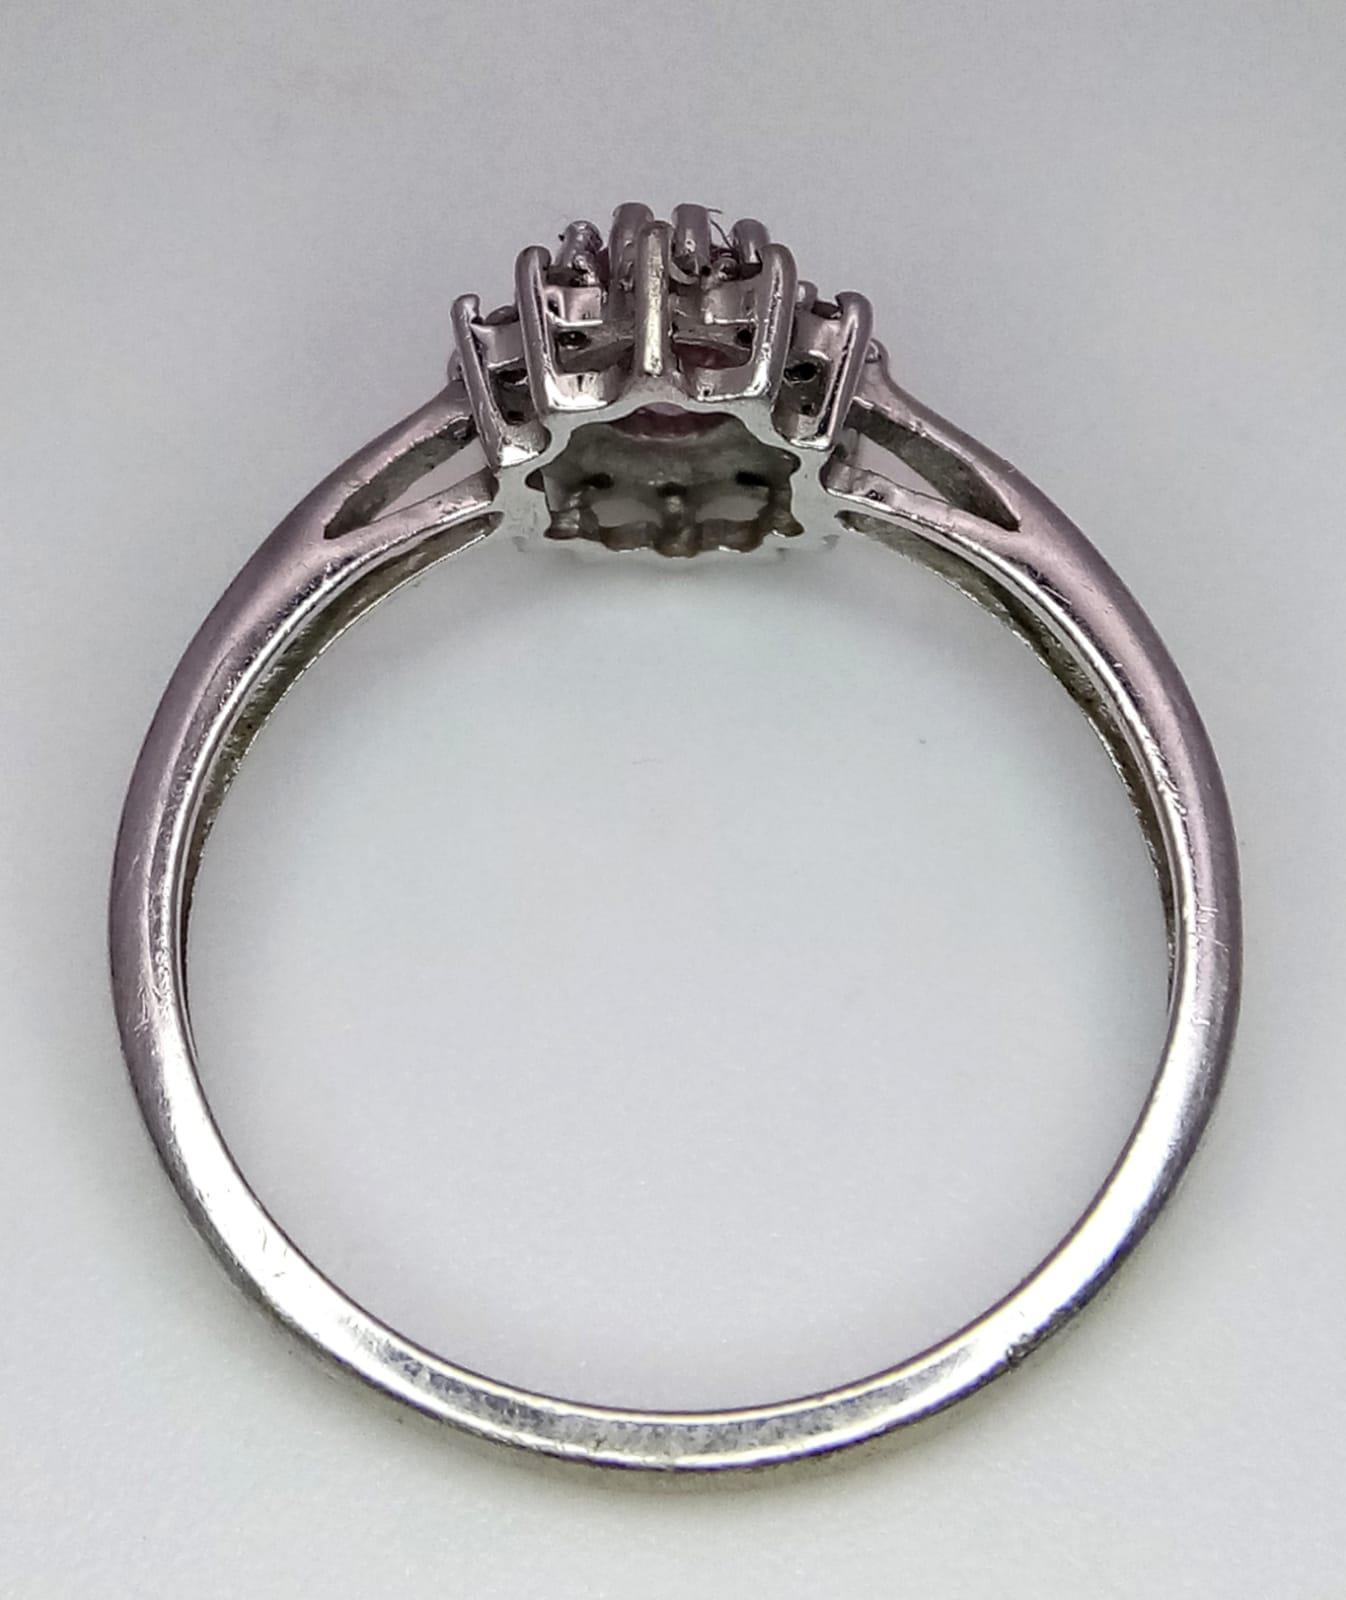 9k white gold diamond and pink sapphire ring. Weight: 2.2g Size: M (dia:0.12ct/sapp:0.40ct) - Image 3 of 4